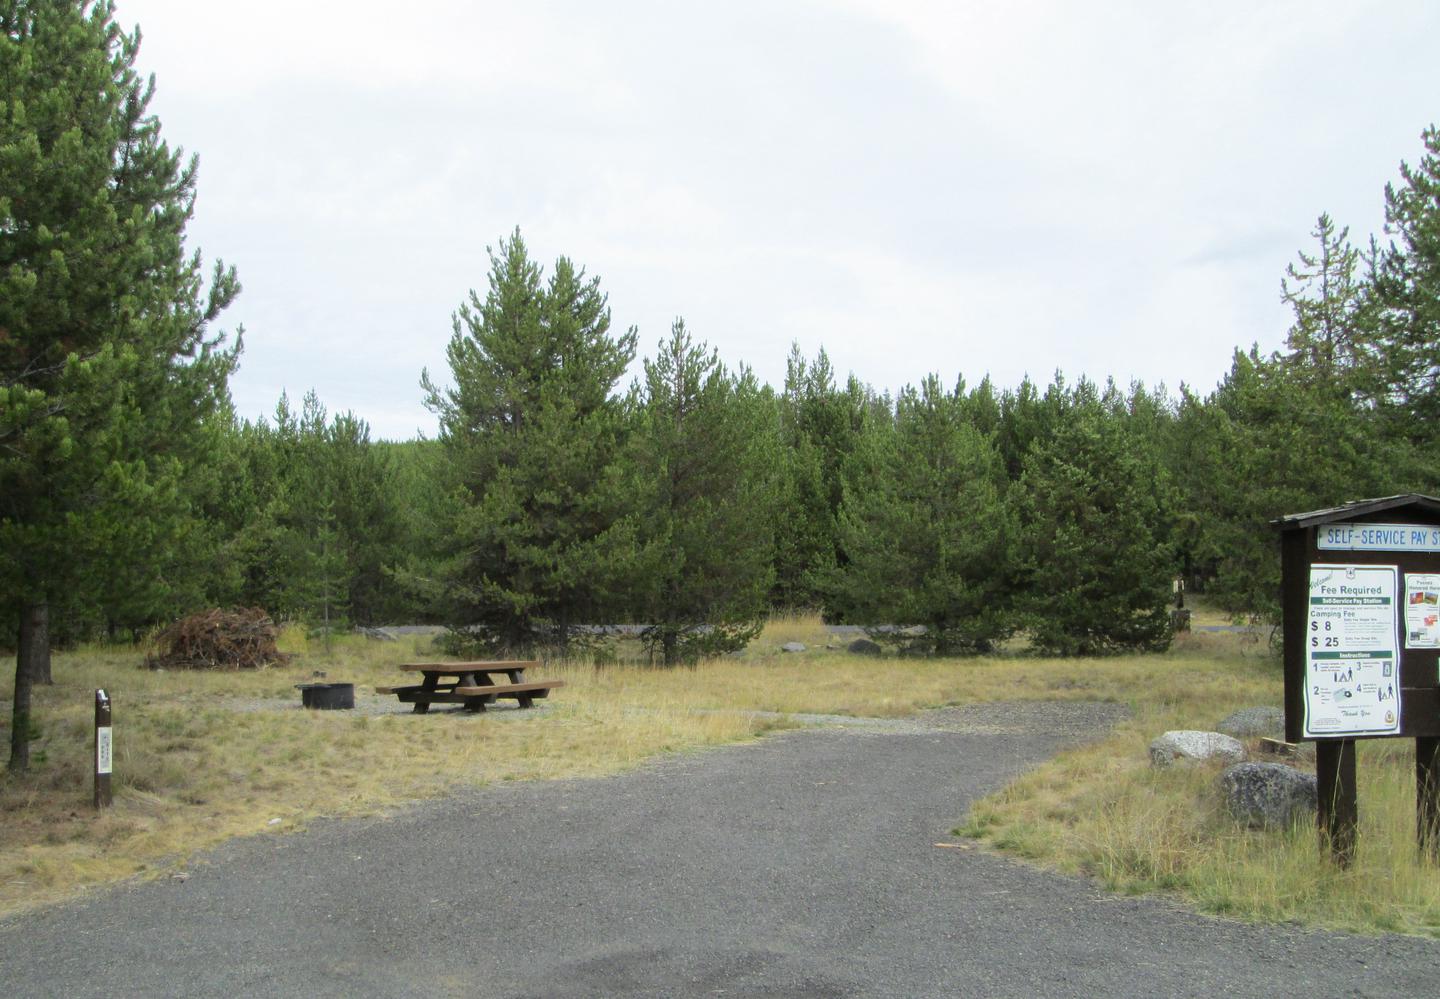 camp site #1 parking area, picnic table and fire ringNFJD Campground site #1